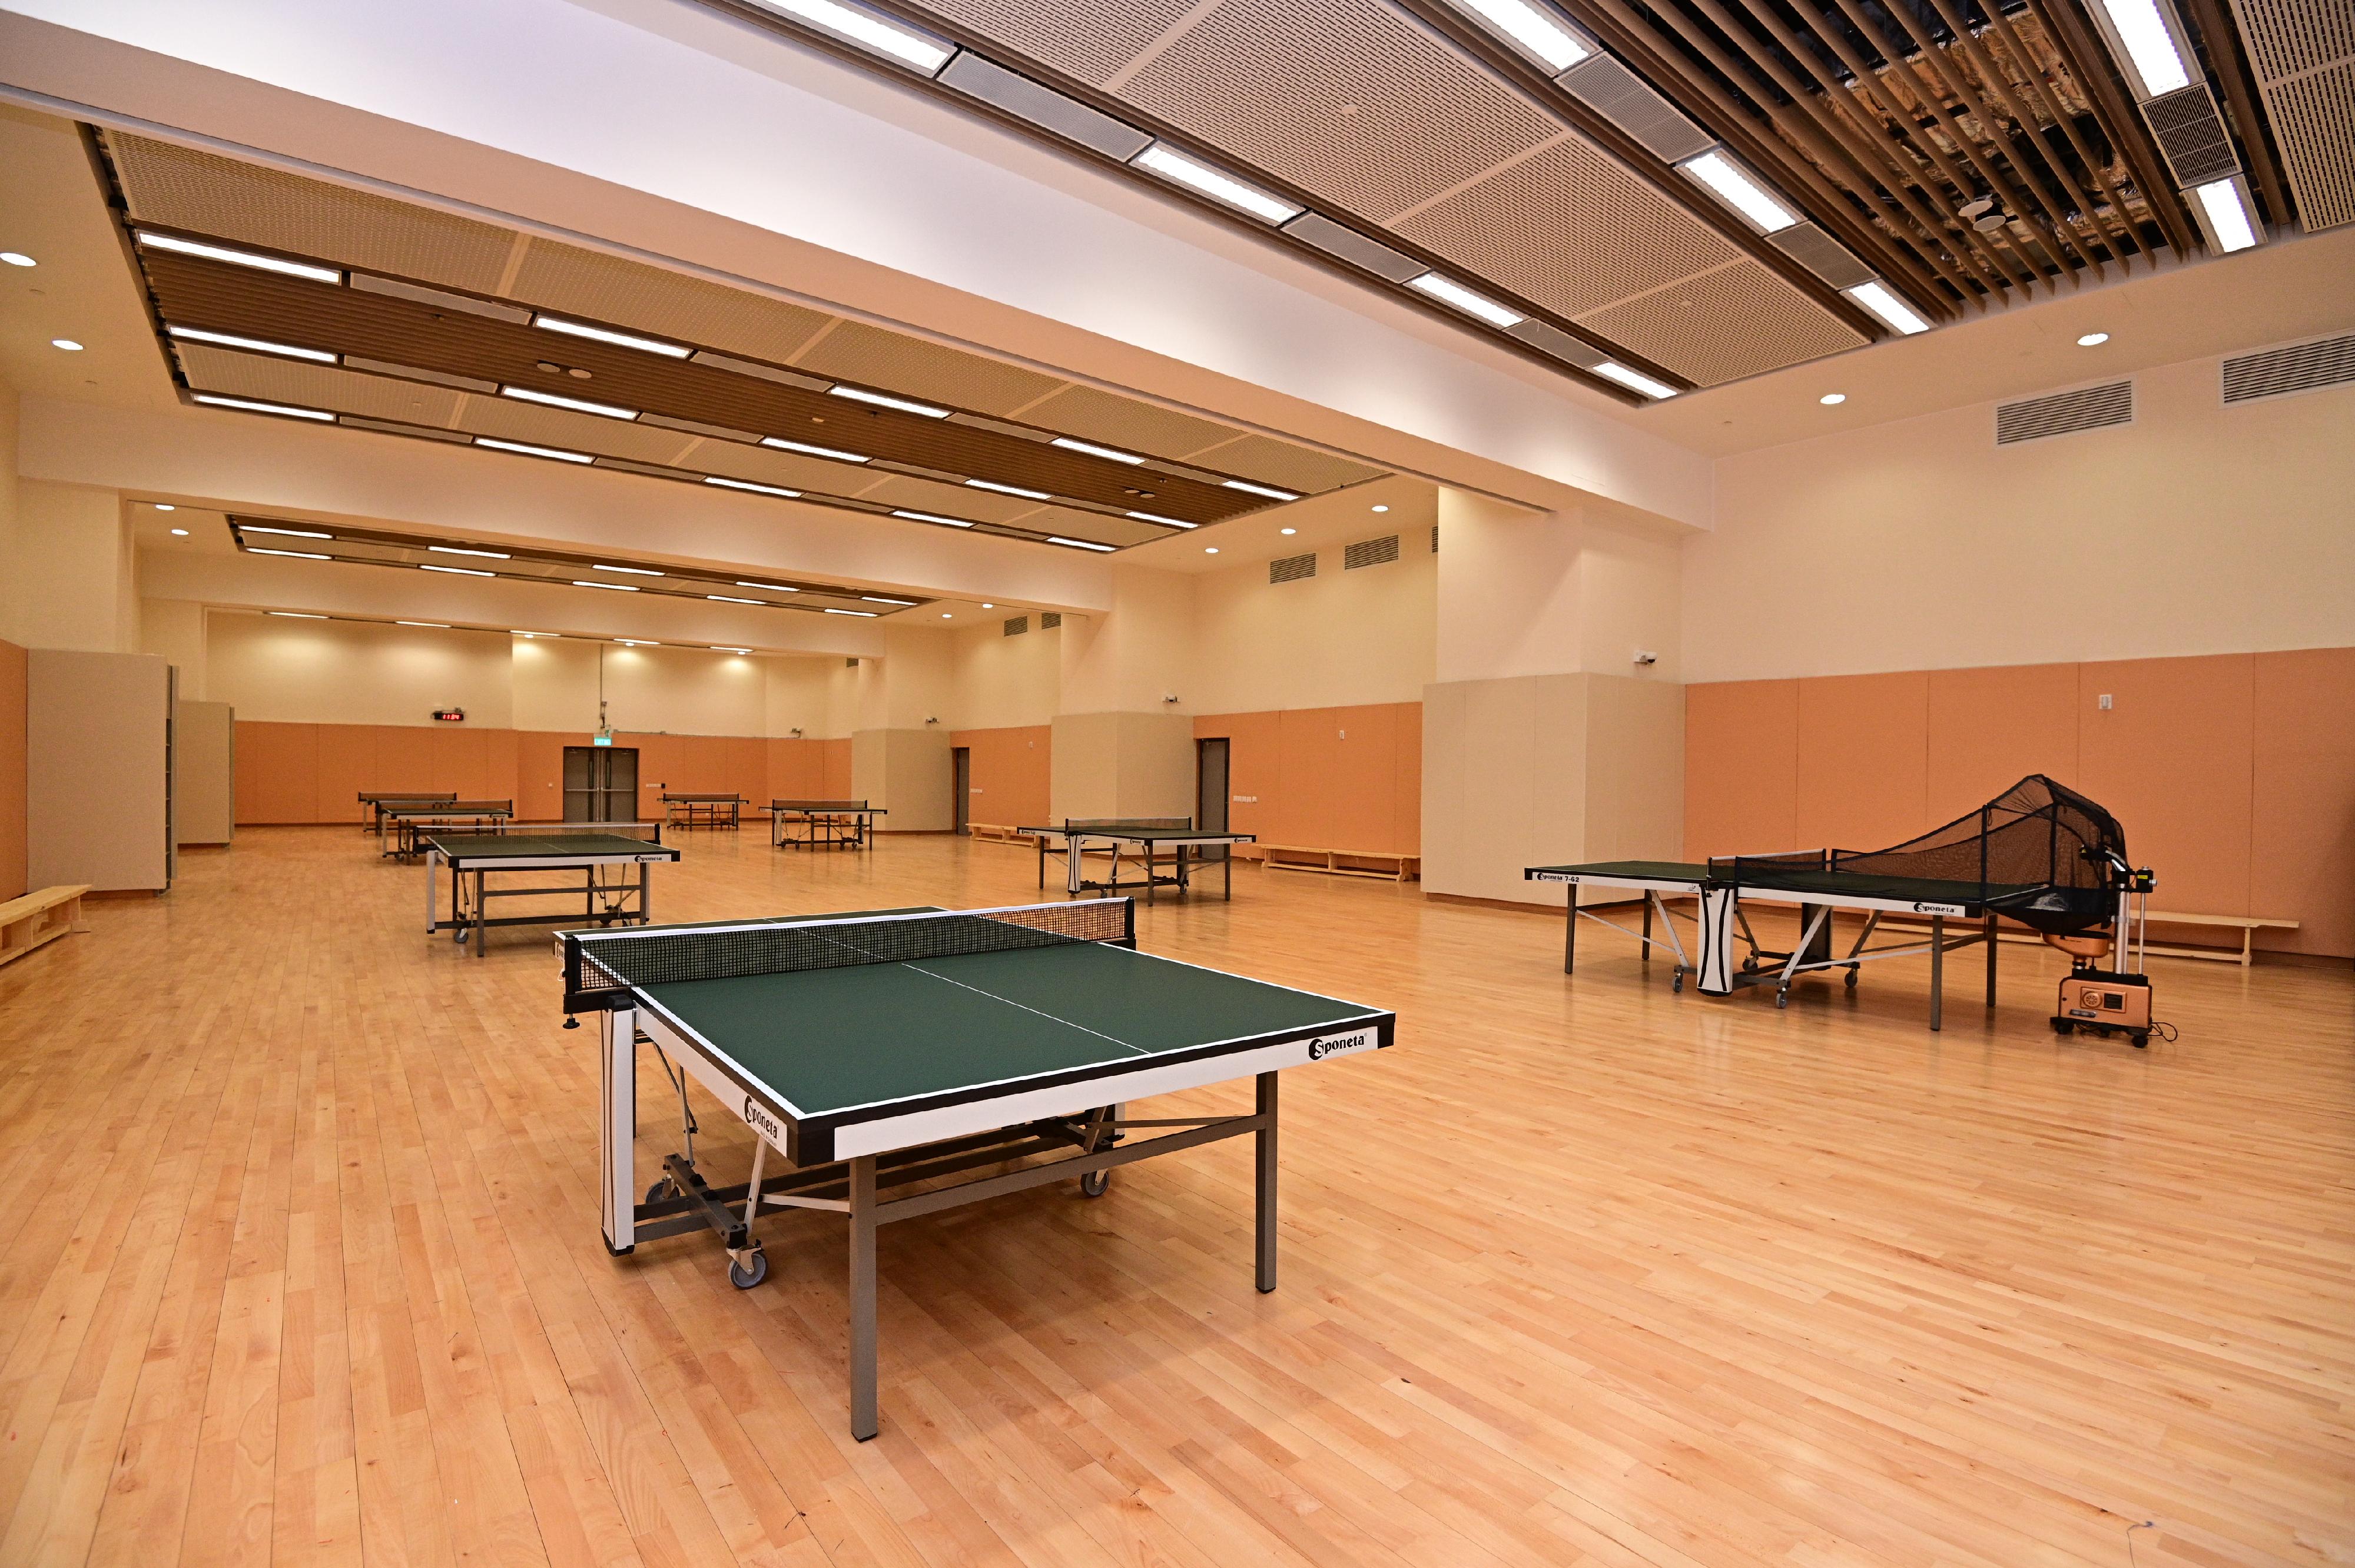 The newly built Choi Wing Road Sports Centre, managed by the Leisure and Cultural Services Department, will open for public use on December 29 (Wednesday), providing a wide range of leisure and sports facilities. Photo shows the table tennis room.